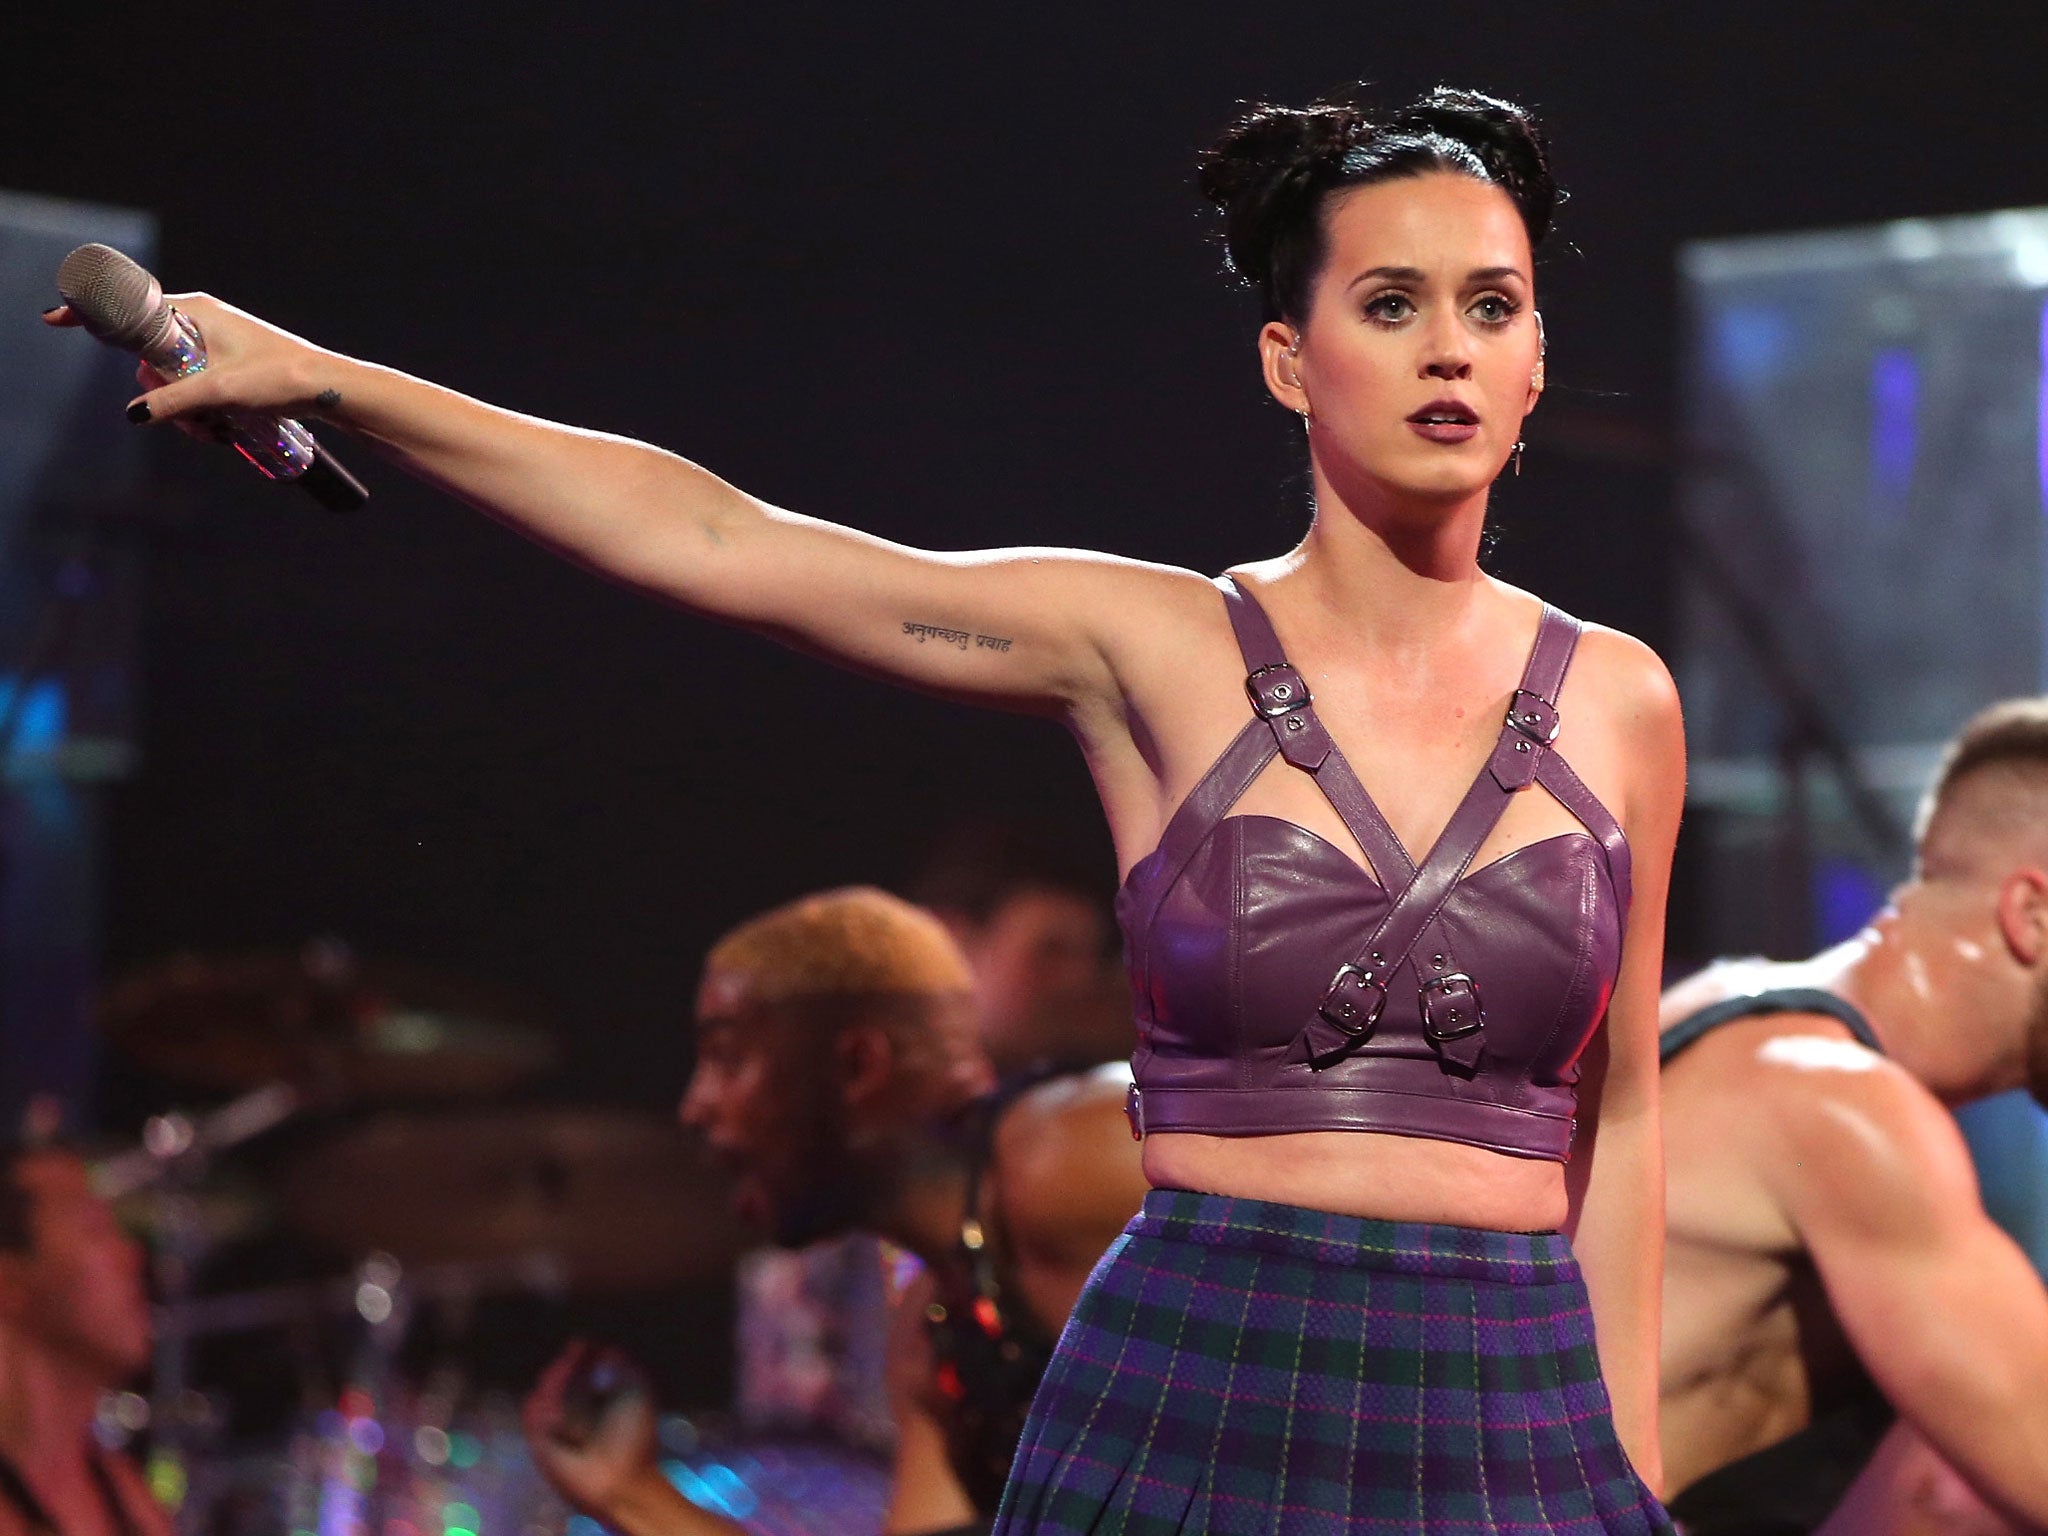 Katy Perry singing at the iTunes festival